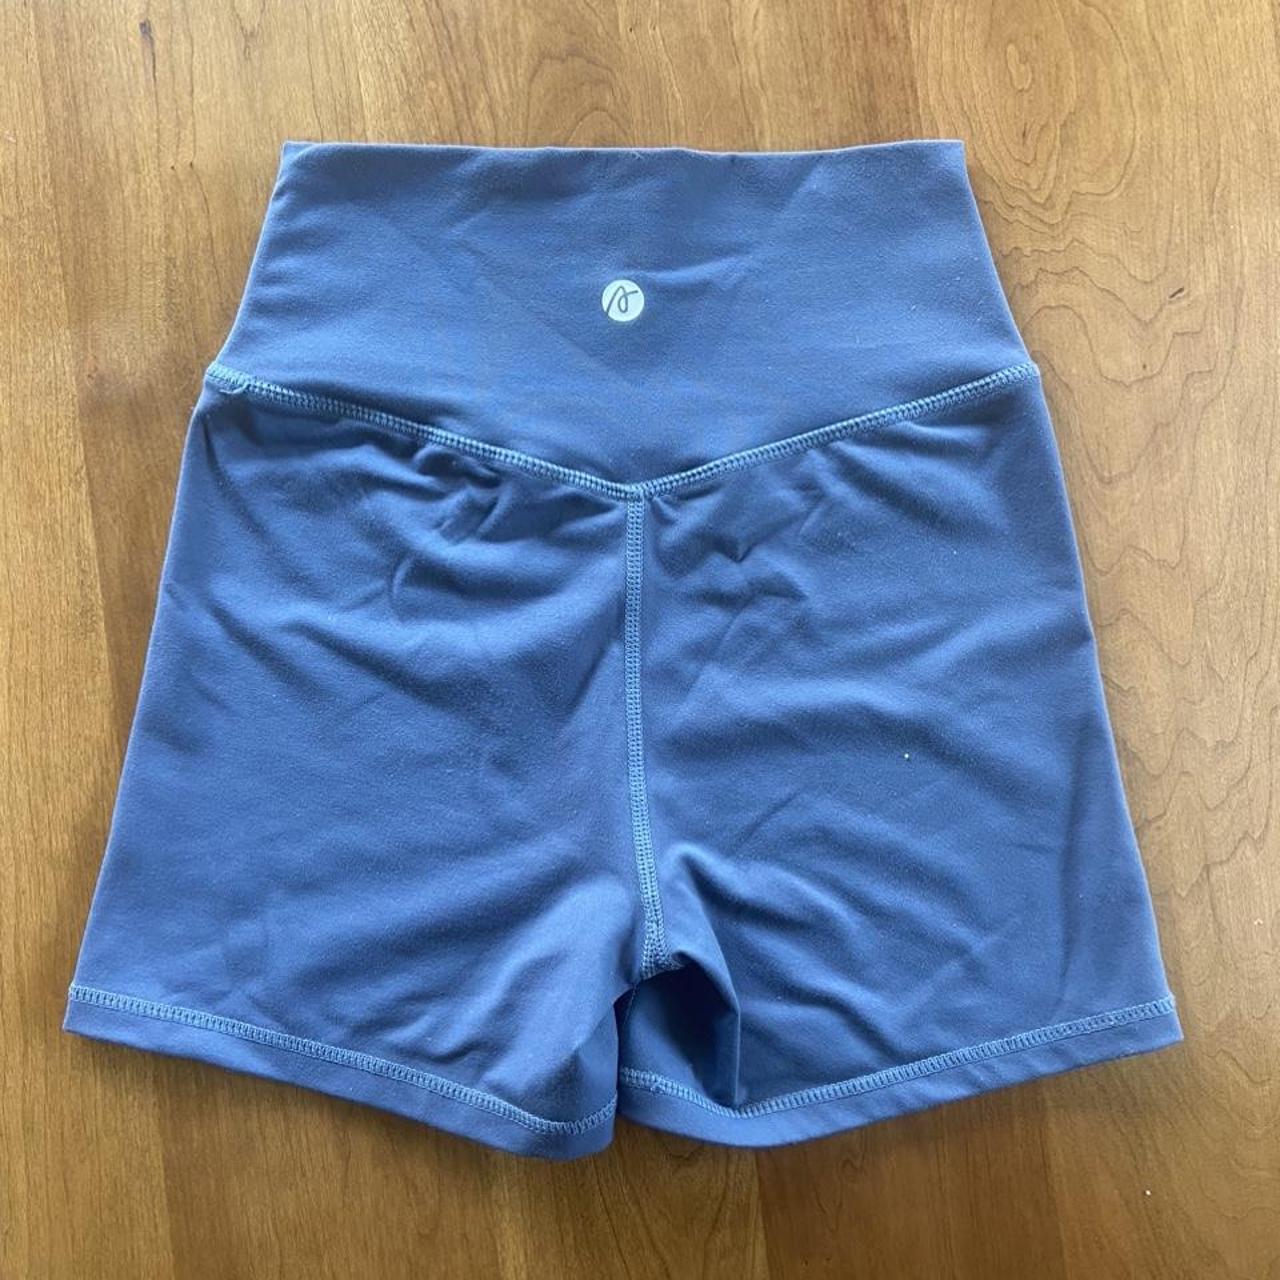 AYBL workout biker shorts in a size XS. these are so